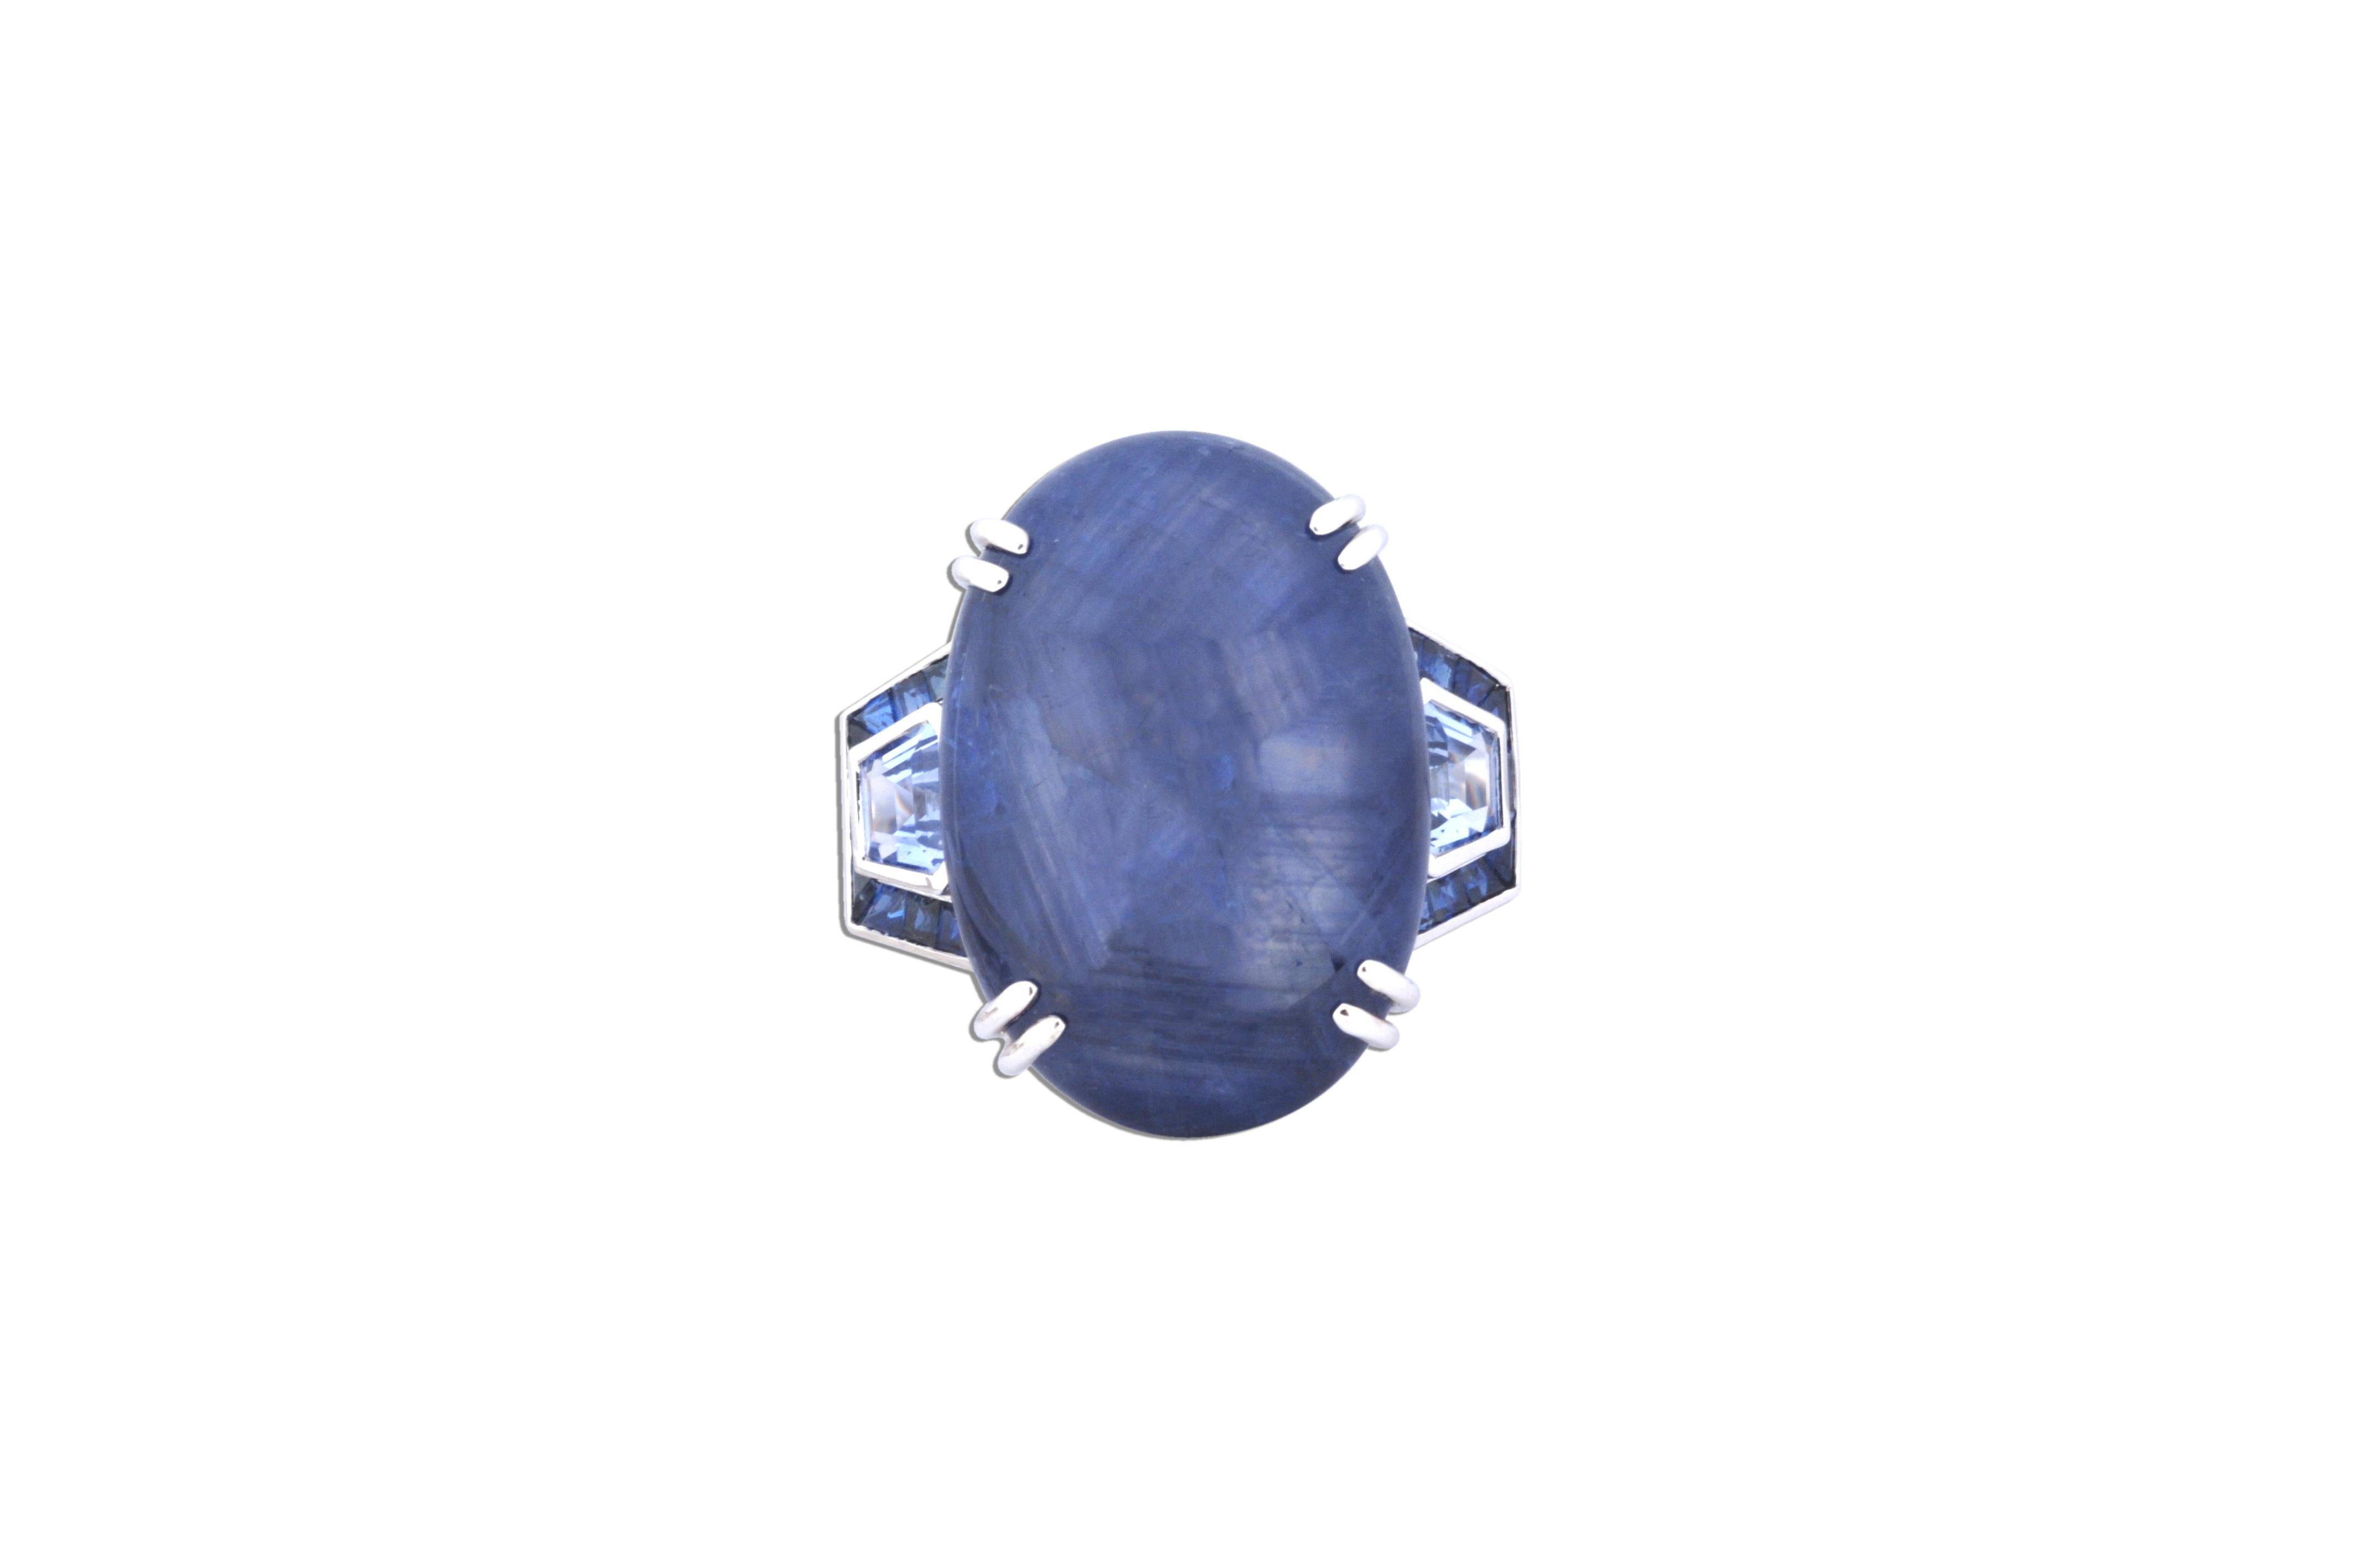 Blue Star Sapphire 48.18 carats, Blue Sapphire 1.73 carats, Blue Sapphire 1.51 carats, Blue Sapphire 2.36 carats Ring in 18 karat White Gold Settings

Width: 3.0 cm
Length: 2.8 cm
Ring Size: 57
Total Weight: 26.13 grams

